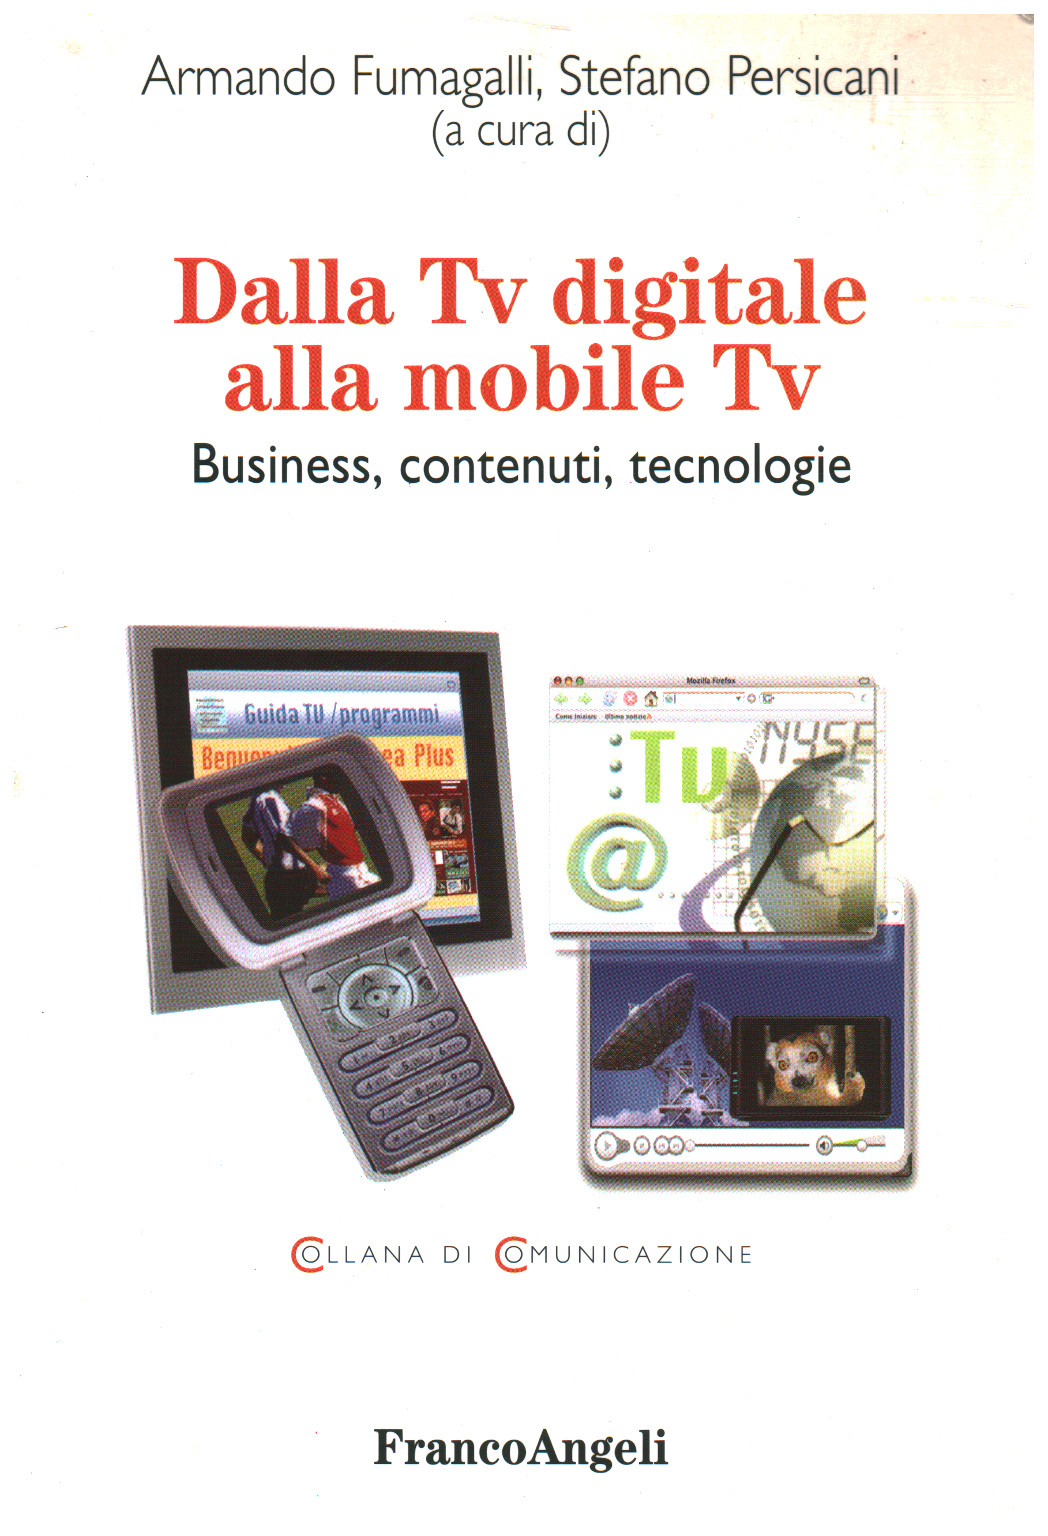 From digital TV to mobile TV, s.a.